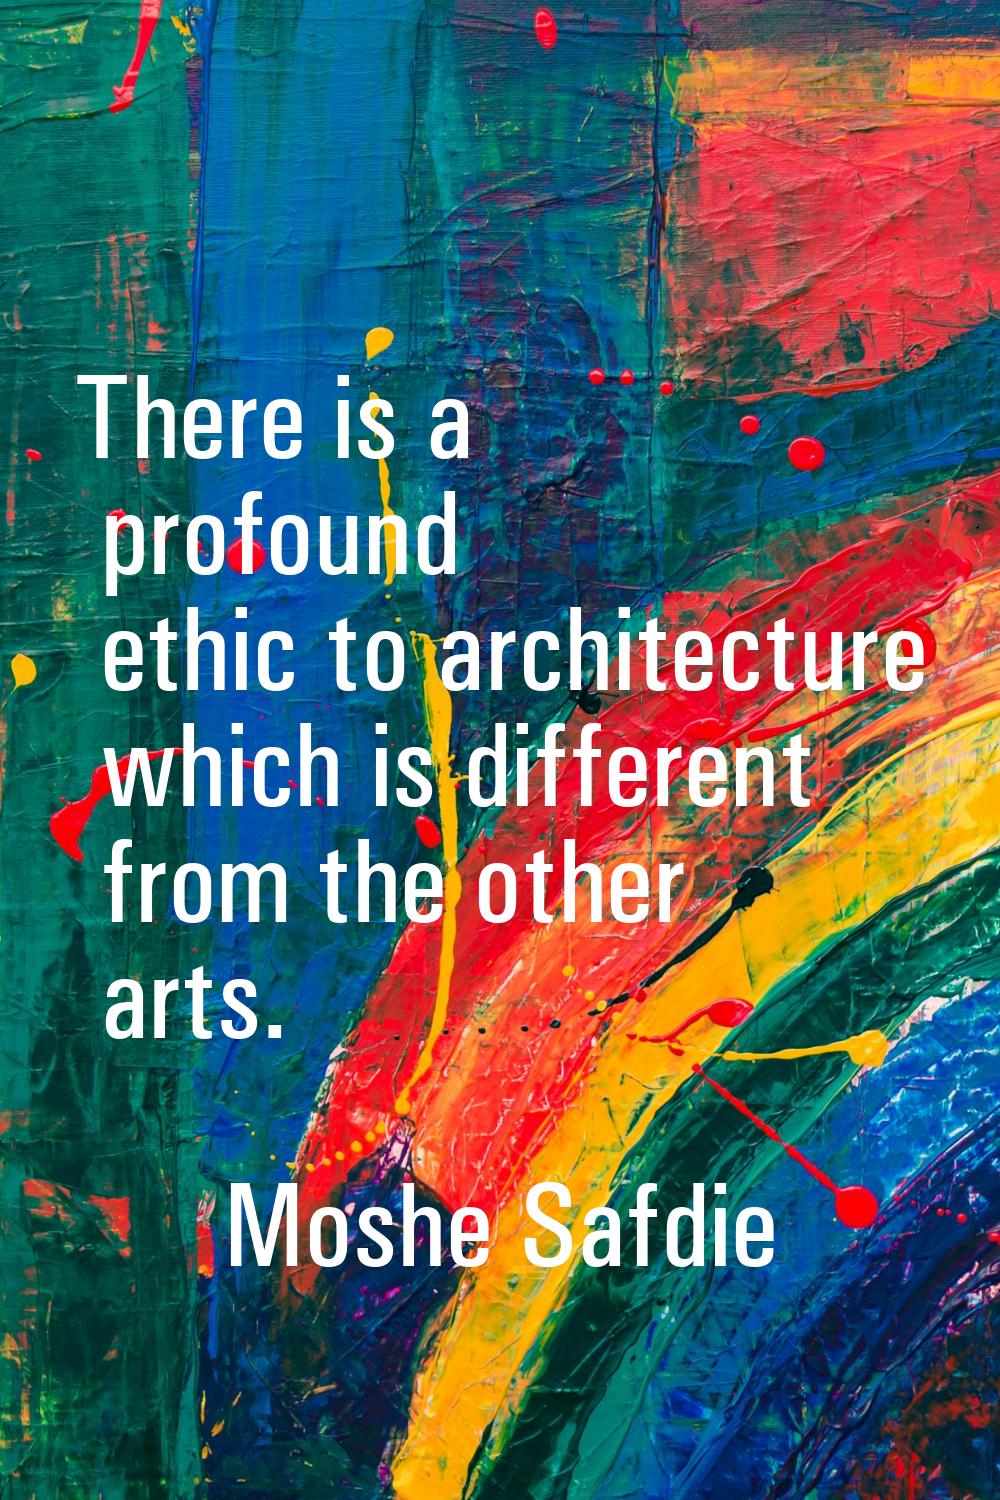 There is a profound ethic to architecture which is different from the other arts.